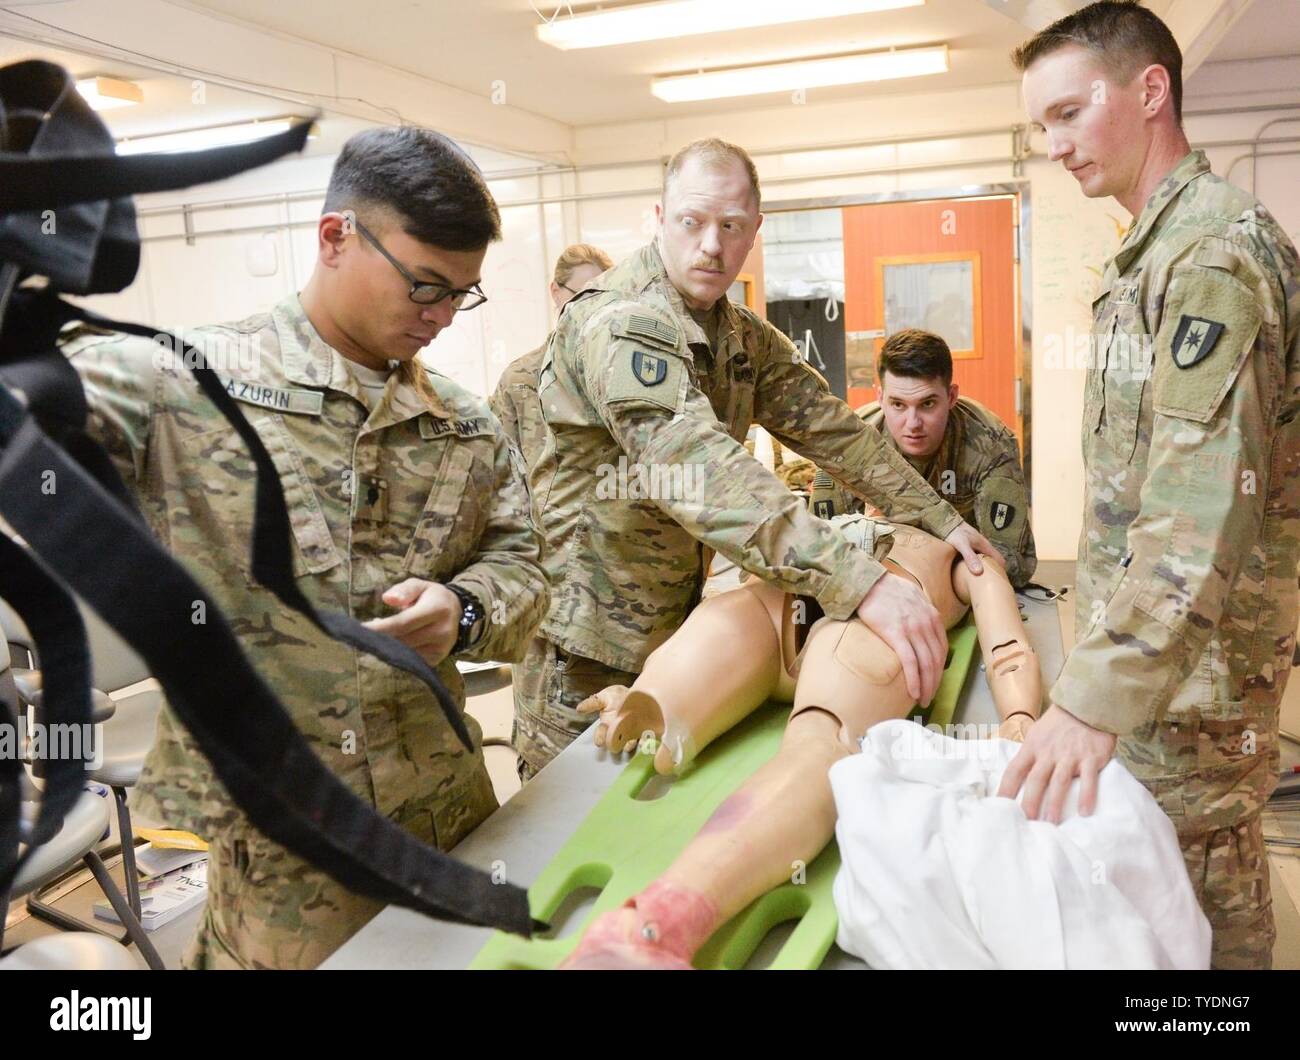 U.S. Army Soldiers, 28th Combat Support Hospital, prepare to remove a simulated trauma patient from a backboard during the Trauma Nursing Core Course hosted by the 28th CSH near Baghdad, Iraq, Nov. 2, 2016. This is the first time TNCC, a highly sough-after trauma training course for nurses, has been conducted by a unit deployed in support of Operation Inherent Resolve. Effective and comprehensive training is key for deployed medical personnel to preserve the health of Coalition forces working to weaken and defeat Islamic State in Iraq and the Levant. Combined Joint Task Force-Operation Inheren Stock Photo